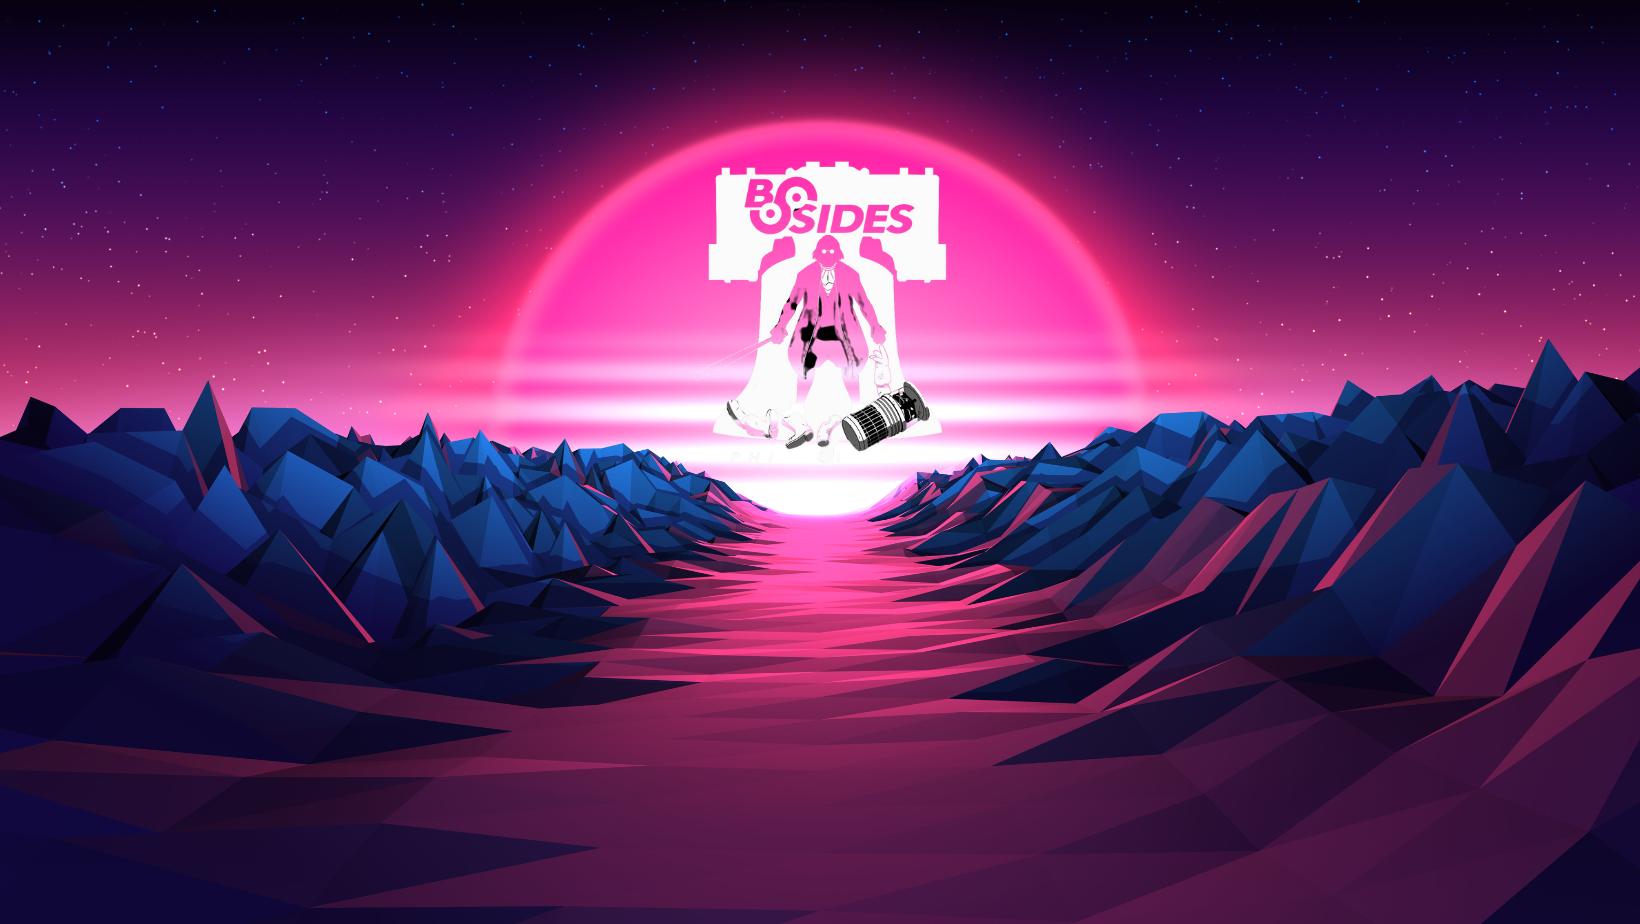 Promo illustration for BSides Philly, with a low-poly 3D-rendered landscape and the conference logo (Ben Franklin with a sword in front of the Liberty Bell) superimposed over a setting pink sun.